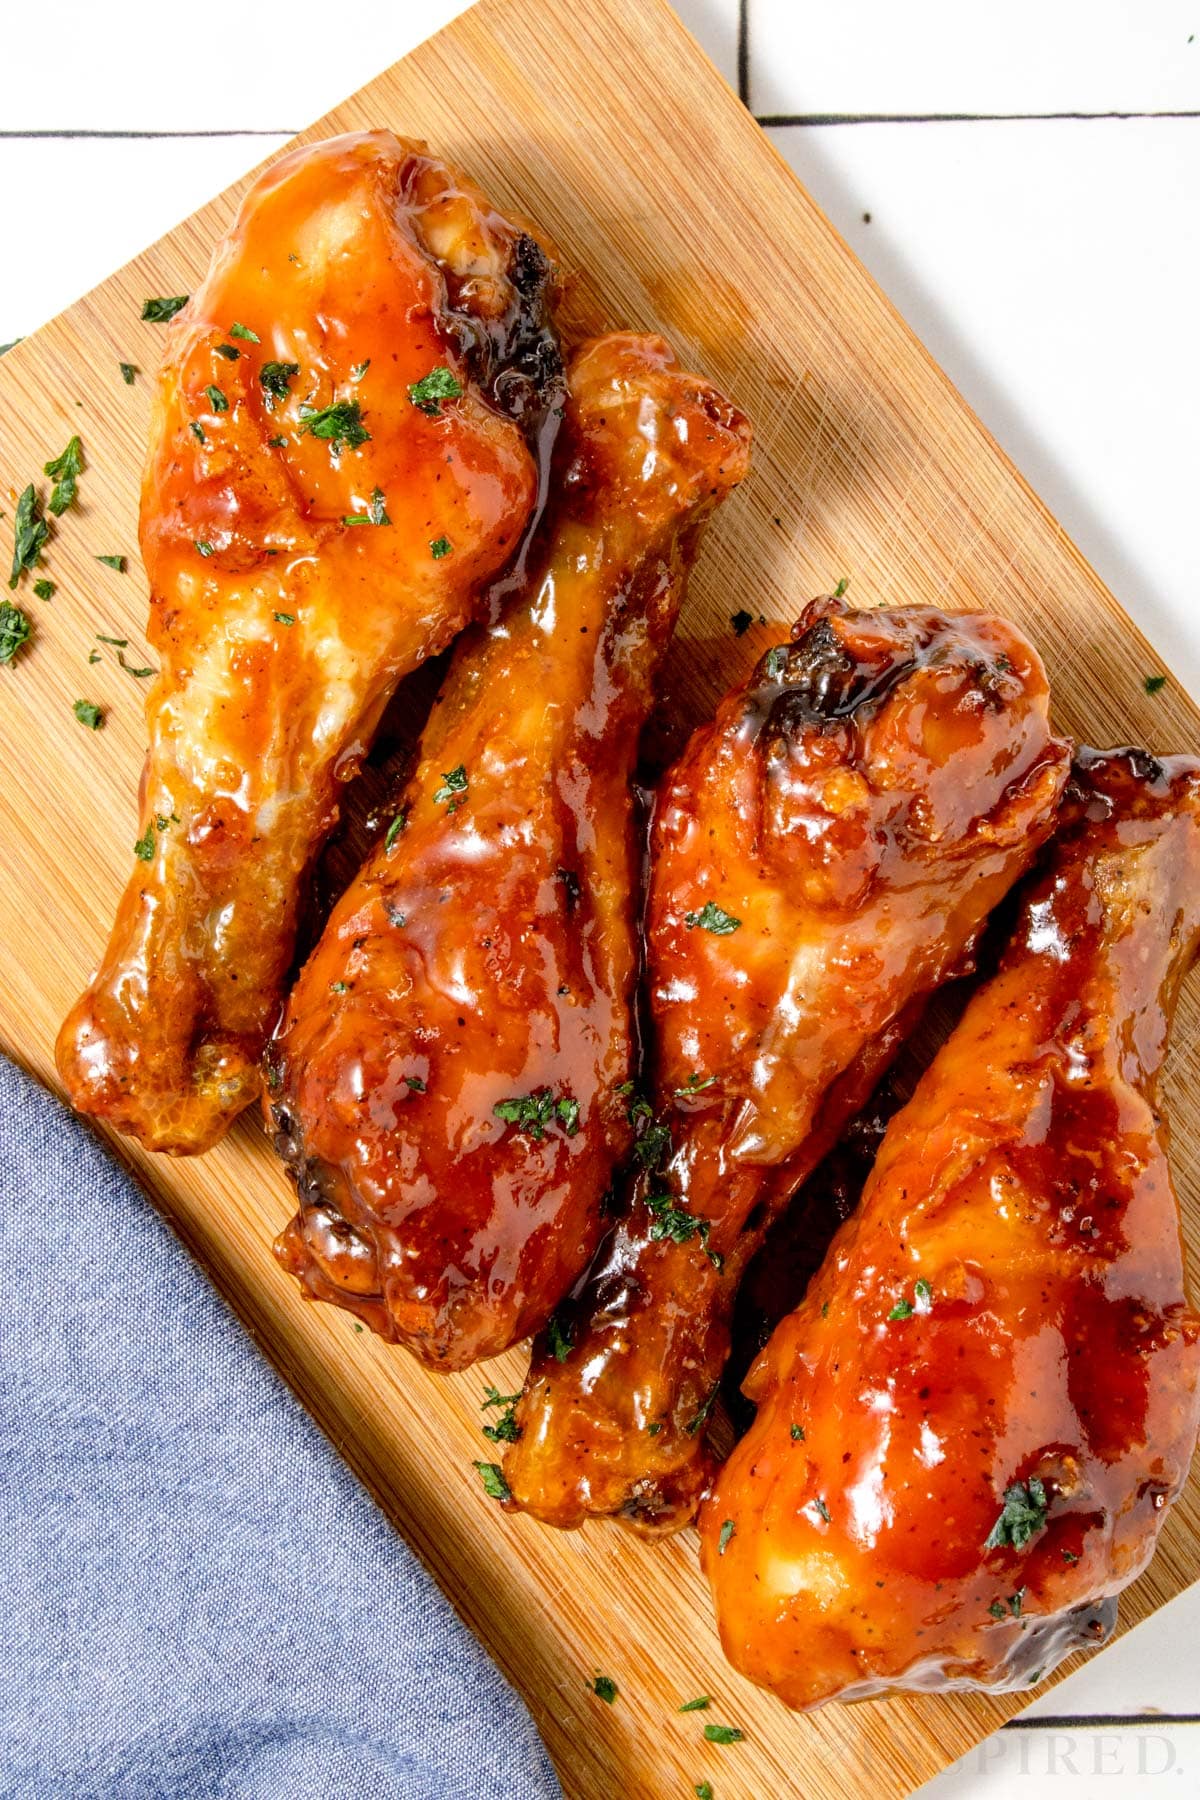 four bbq chicken legs lined up on a wooden cutting board